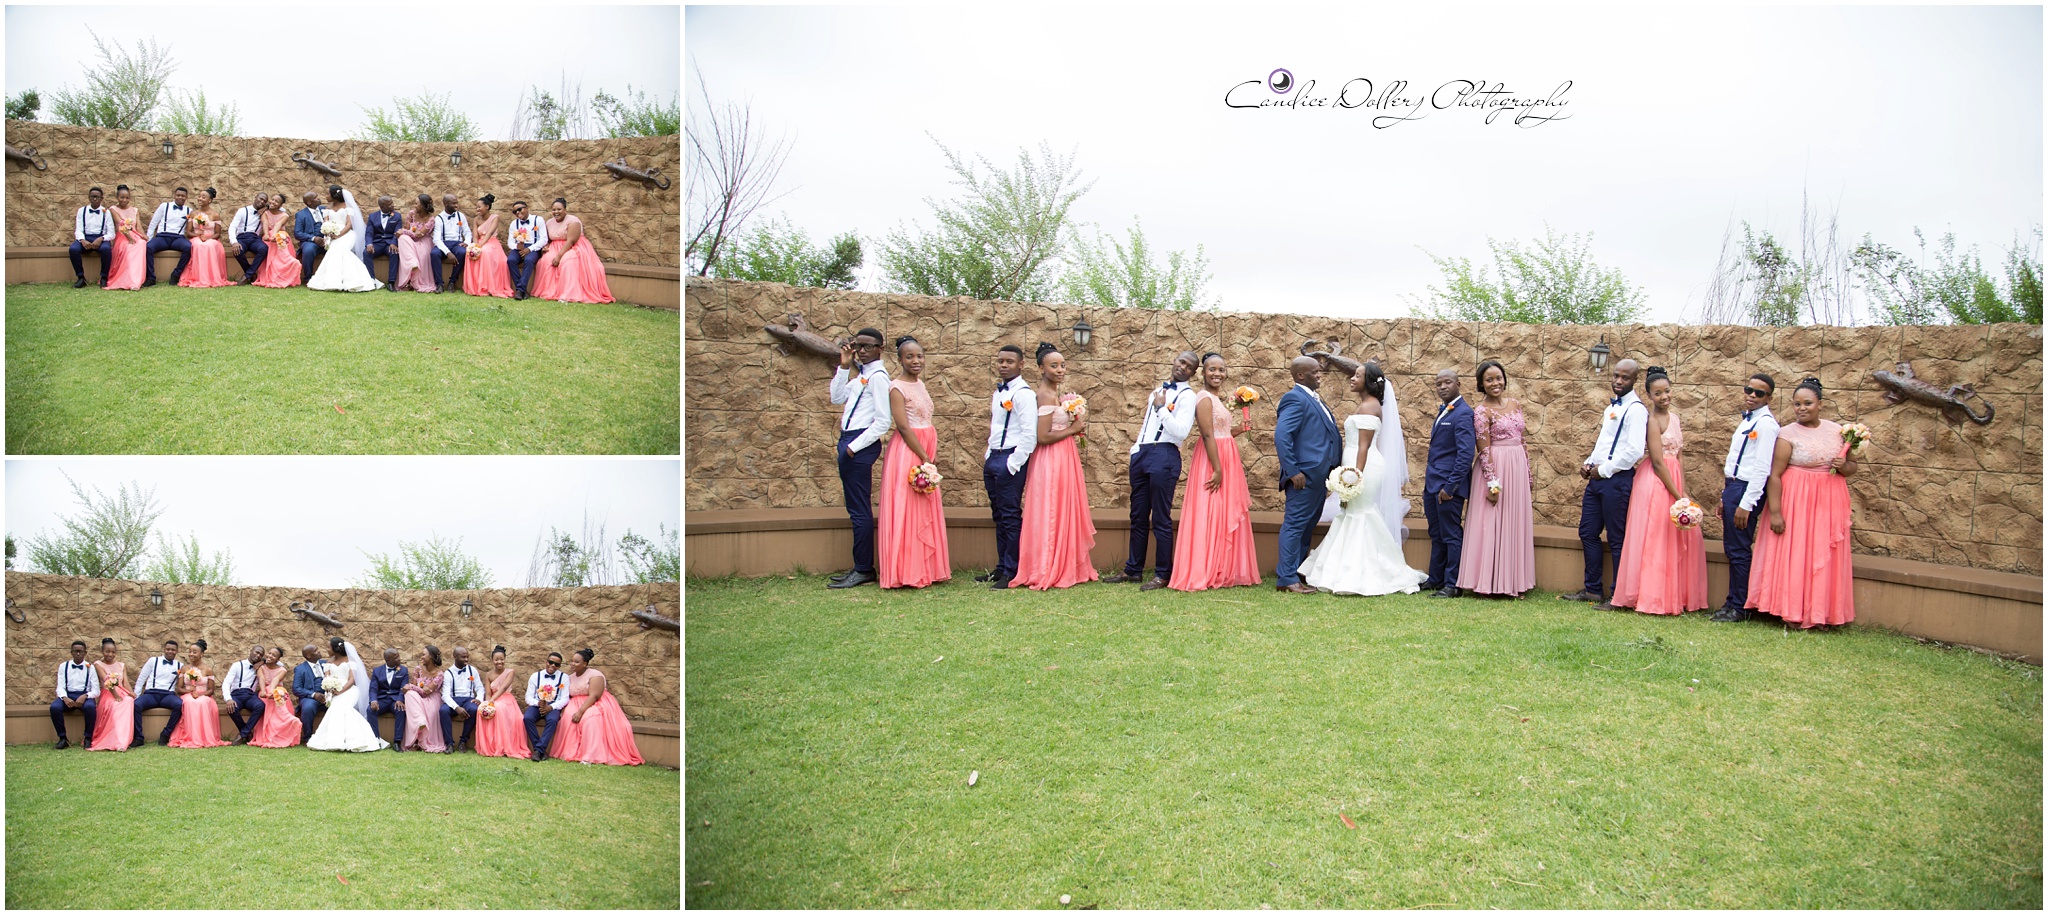 Thembi & Sabelo's Wedding - Candice Dollery Photography_8300